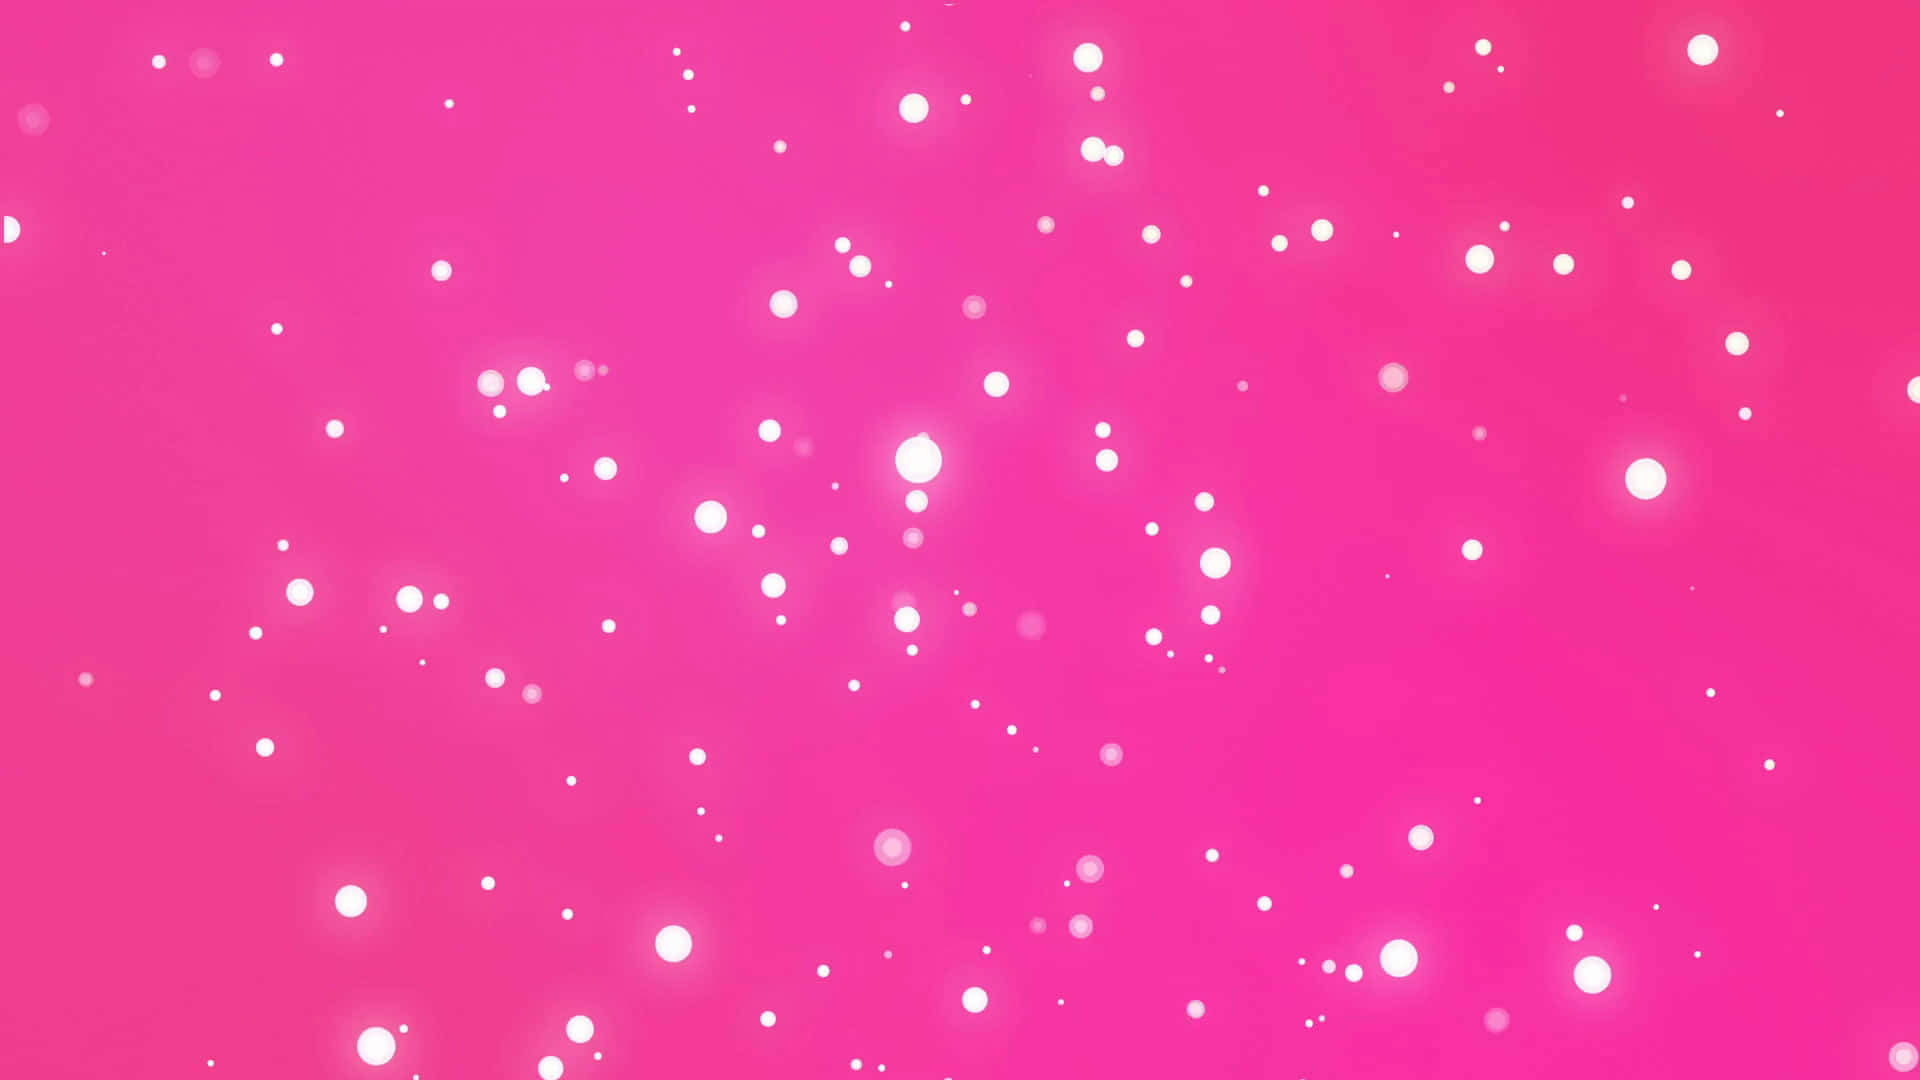 Add a touch of cuteness to your screen with this amazing pink background